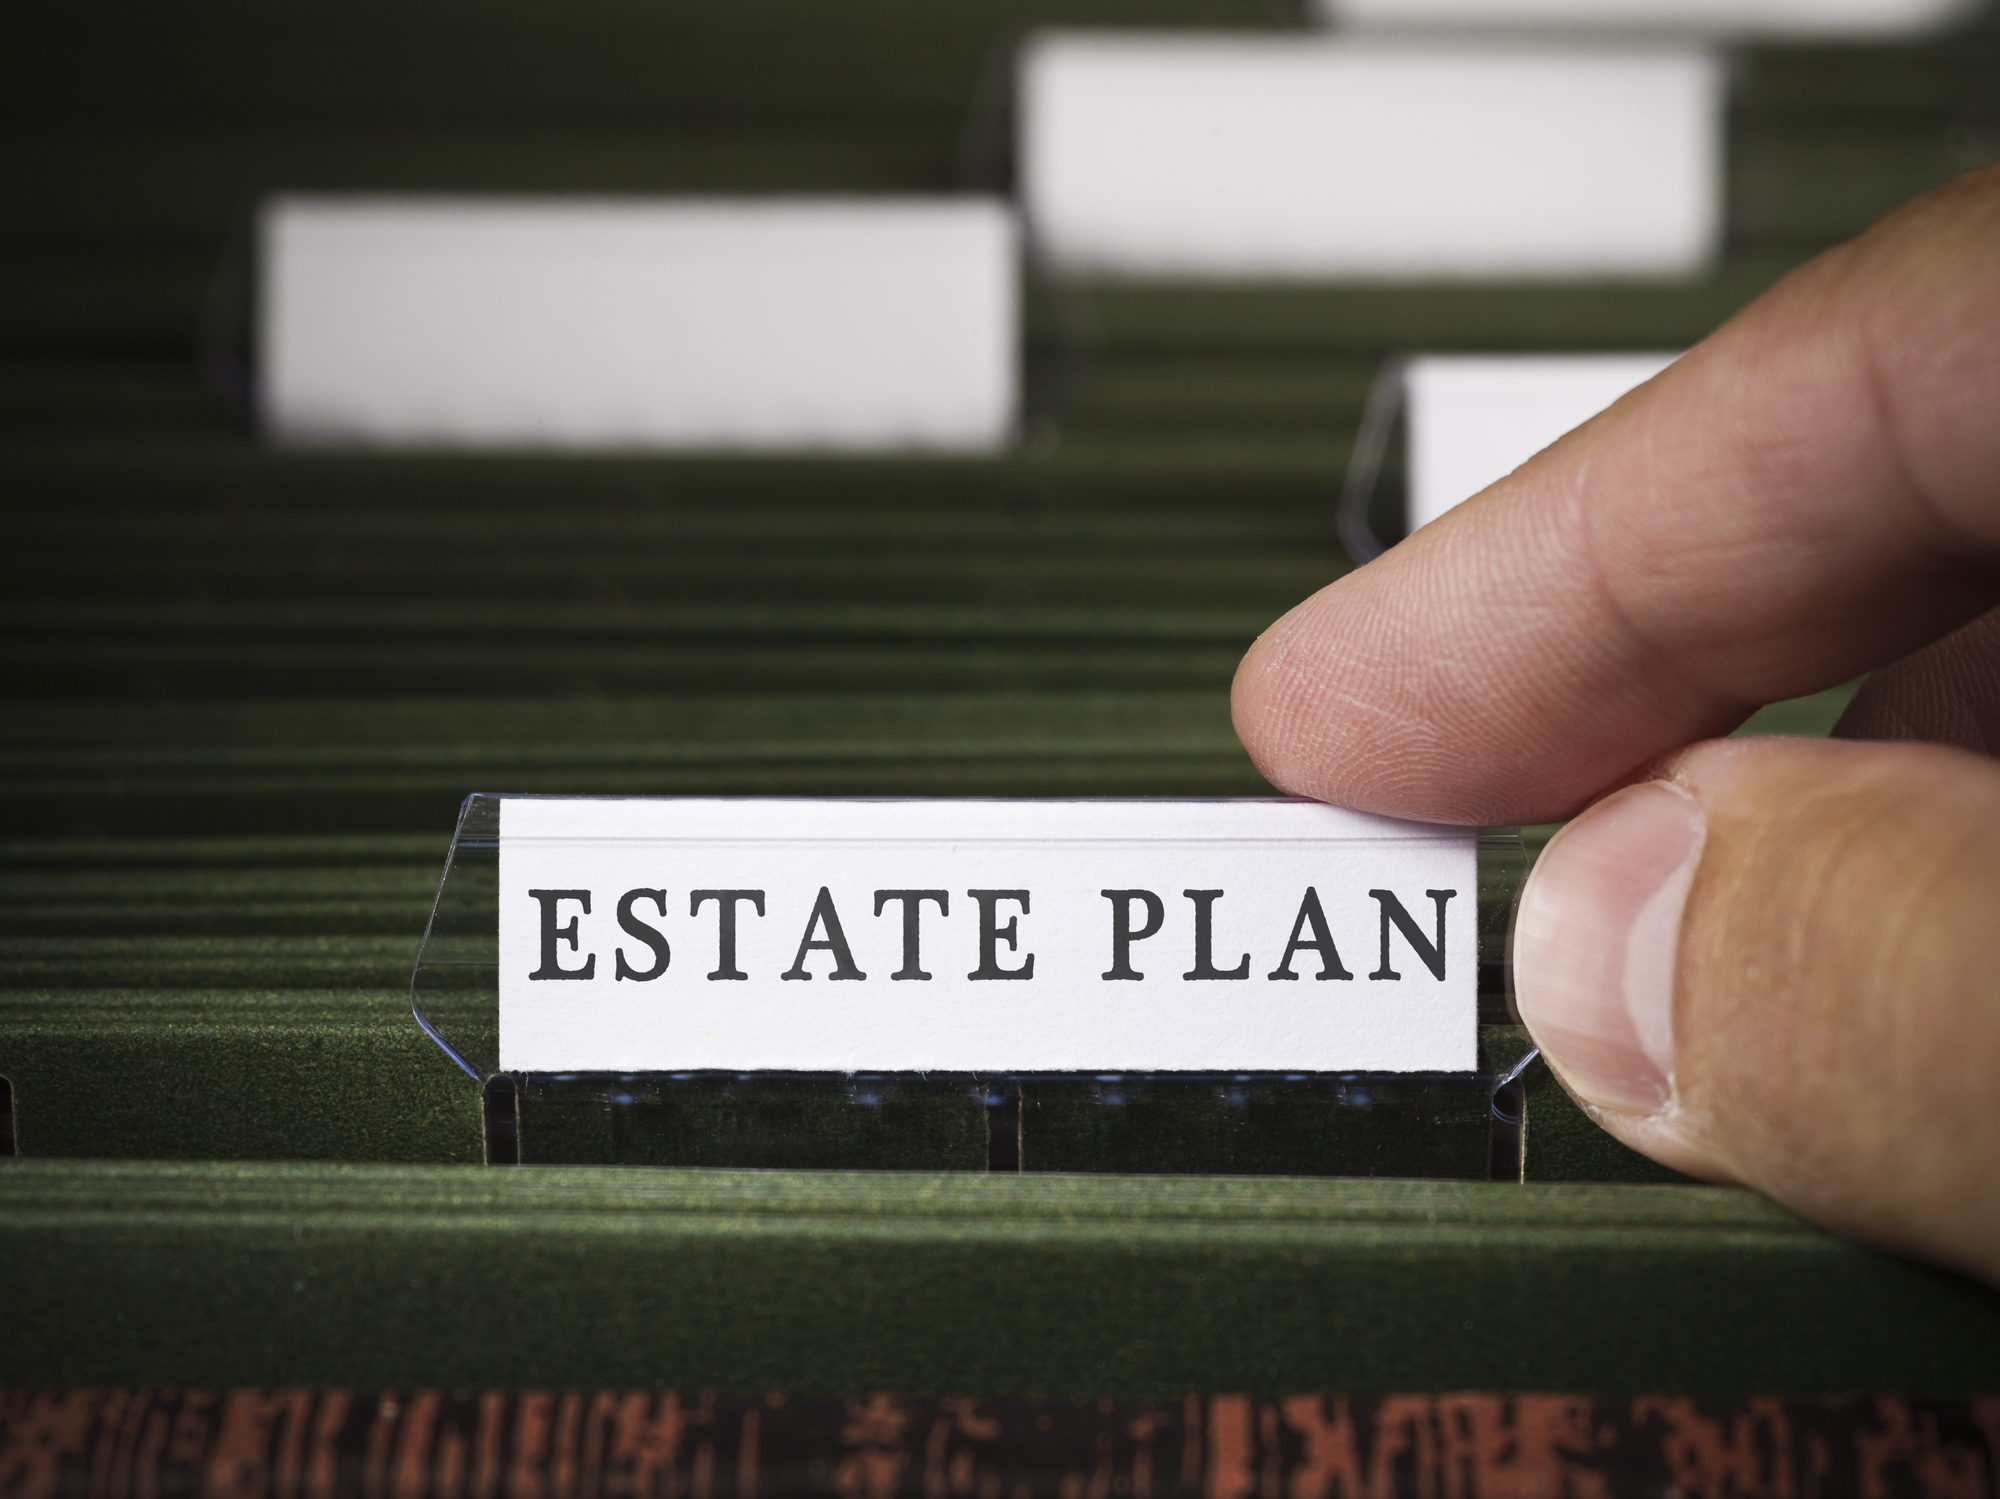 Loew Law Group discusses four important estate-planning documents you may need.